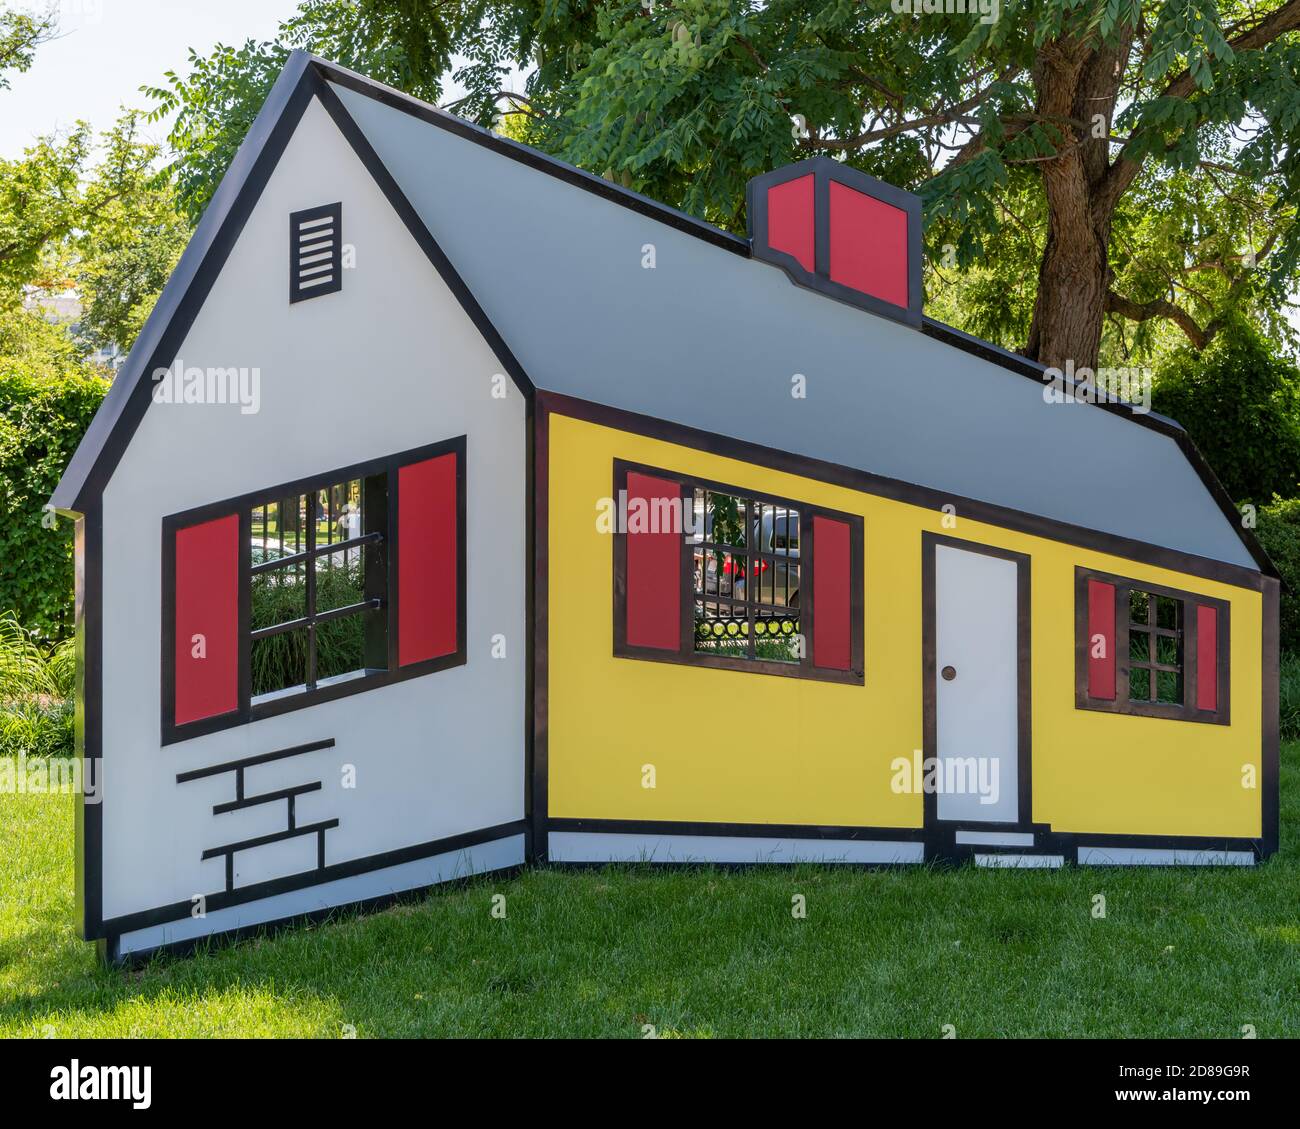 Roy Lichtenstein's 'House I' artwork, fabricated in painted aluminium, gives the illusion of the side projecting towards the viewer while bending away Stock Photo